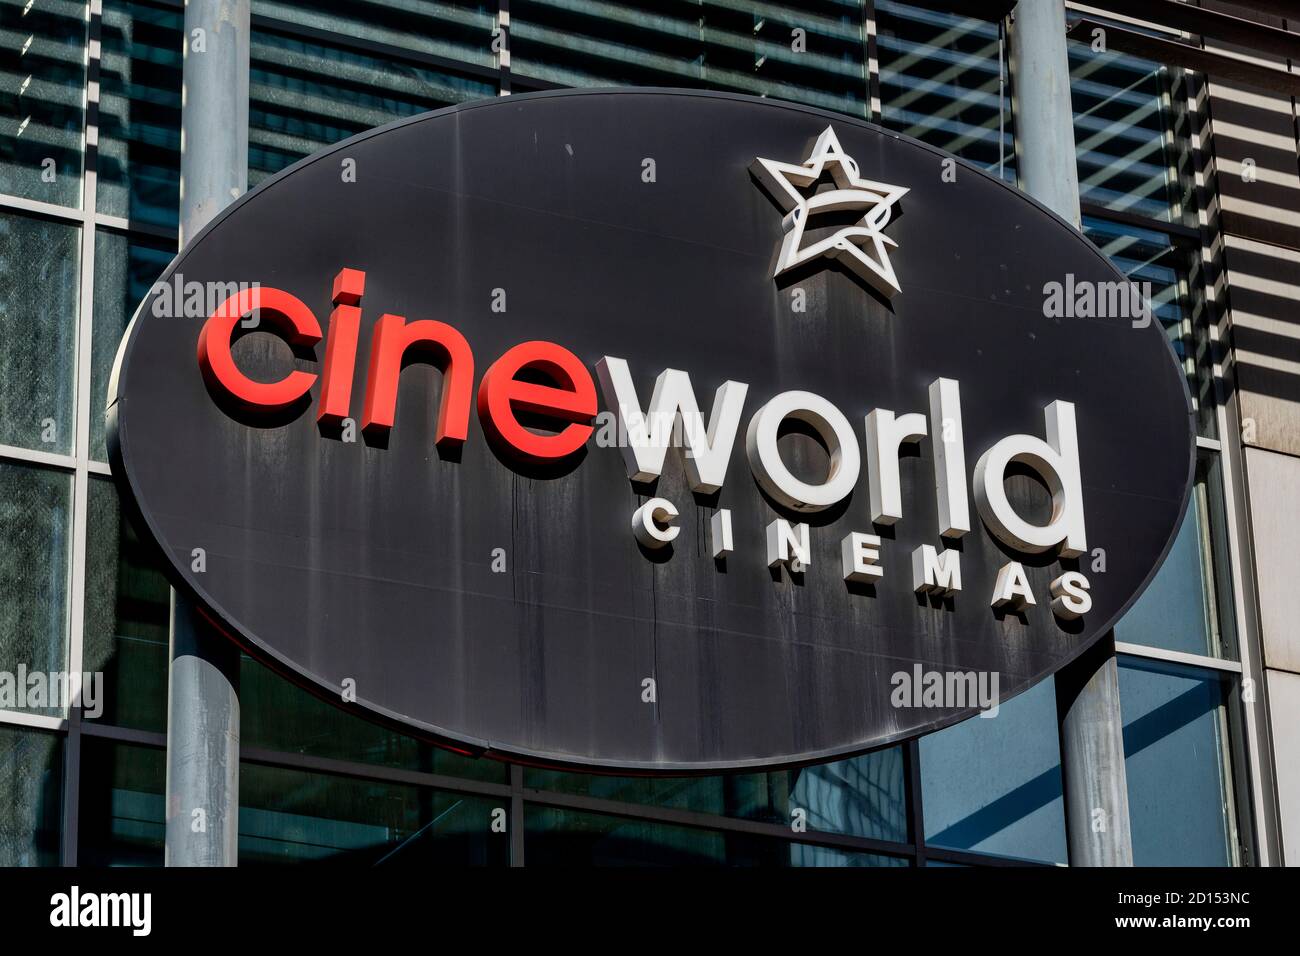 London, UK. 05th Oct, 2020. A Cineworld sign seen in West India Quay, London .Cineworld is on course to cut tens of thousands of jobs after confirming  plans to temporarily shut its UK